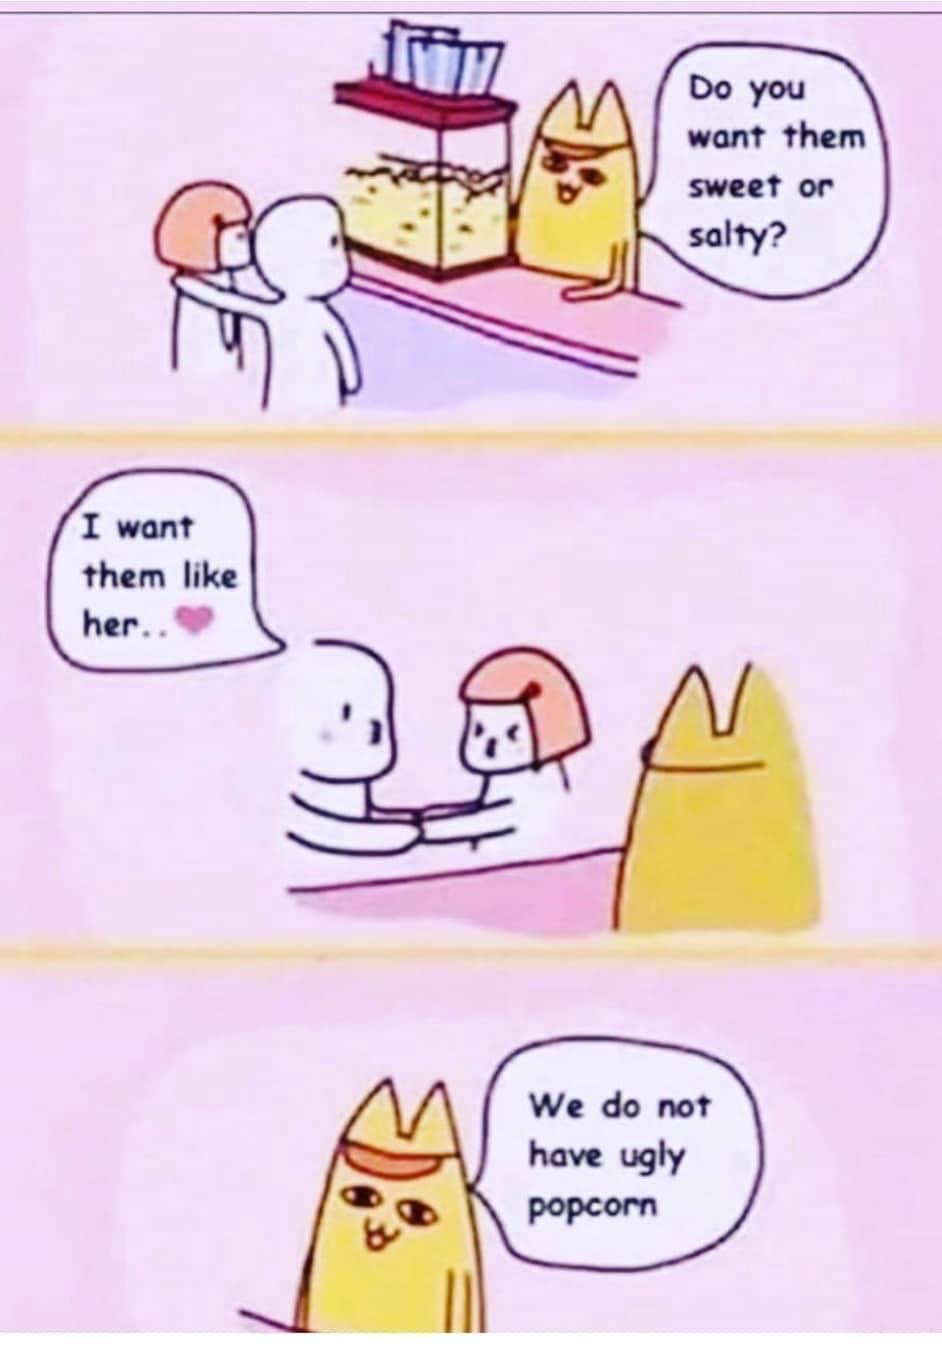 funny cartoon memes - Do you want them sweet or salty? I want them her.. We do not have ugly popcorn 3